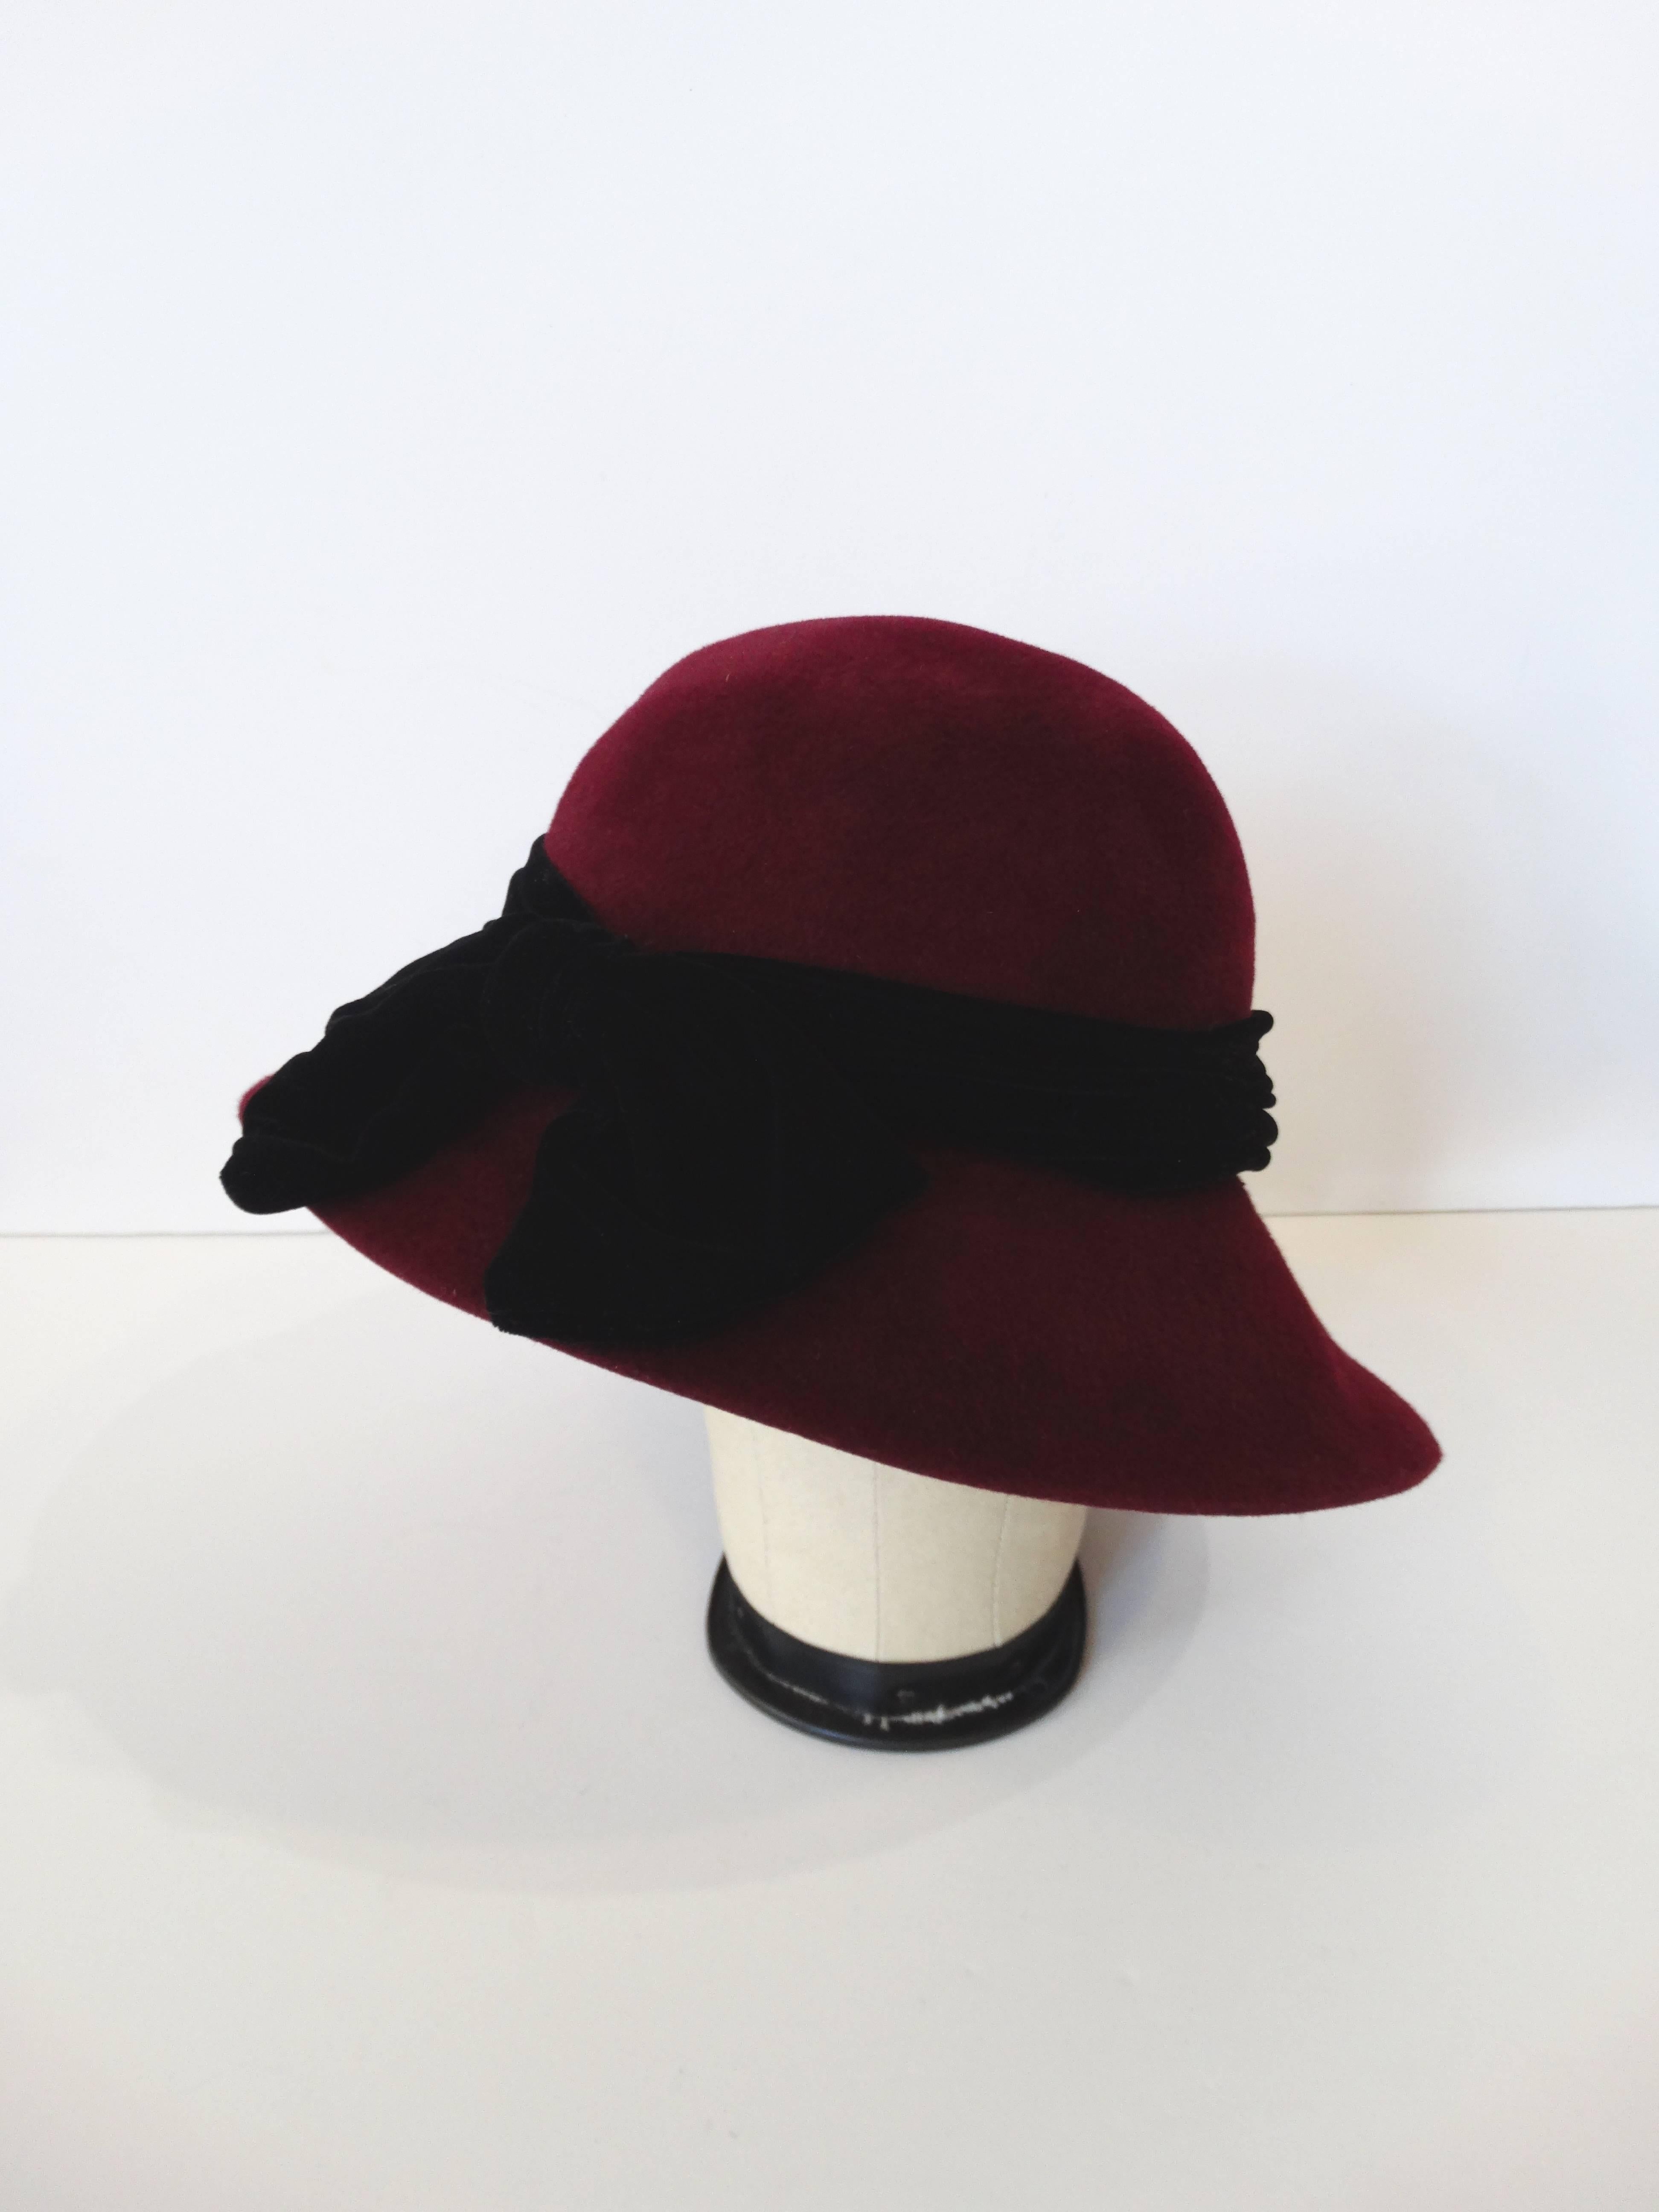 She's style, she's class and she's wearing a YSL hat! Dress to the nines in our 1960s Yves Saint Laurent cloche hat! Classic cloche silhouette with slightly exaggerated brim. Accented with oversized black velveteen bow and trim around the perimeter.